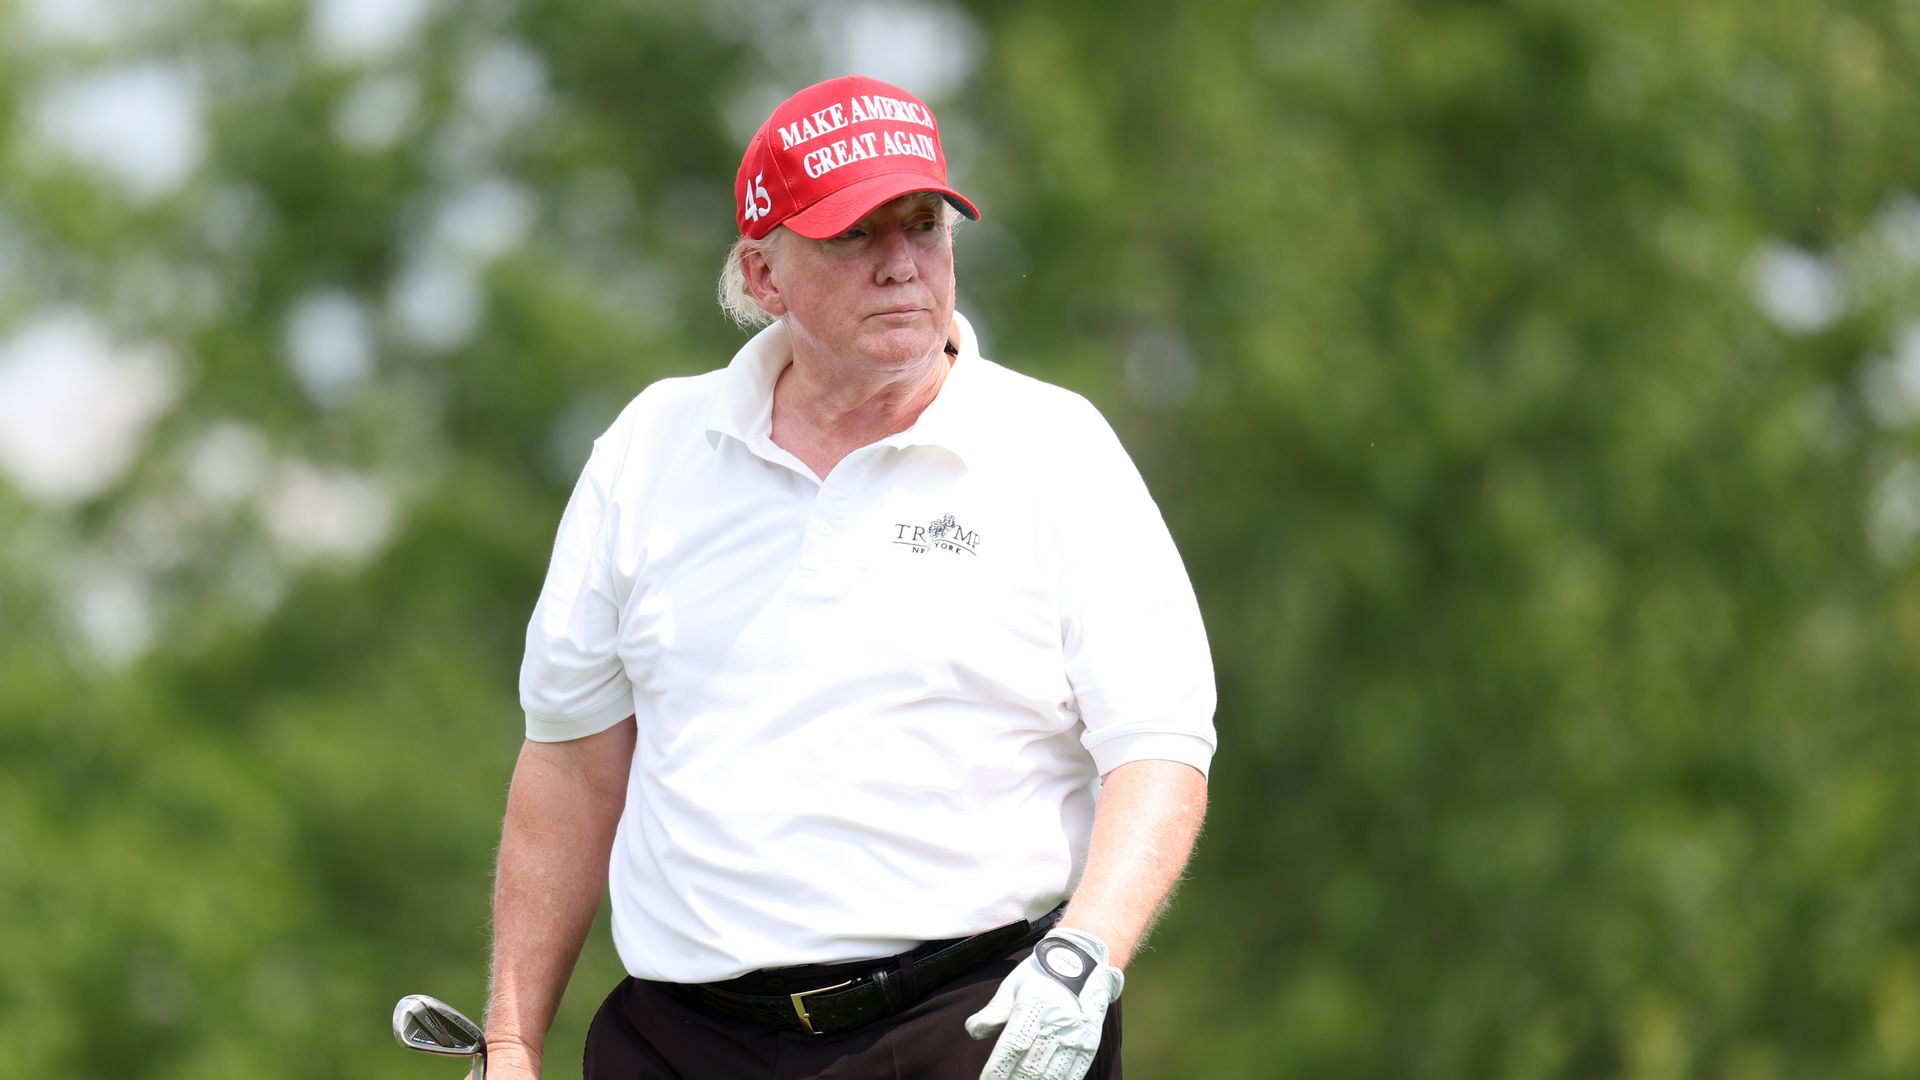 Former U.S. President Donald Trump watches a shot during the pro-am prior to the LIV Golf Invitational - Bedminster at Trump National Golf Club Bedminster